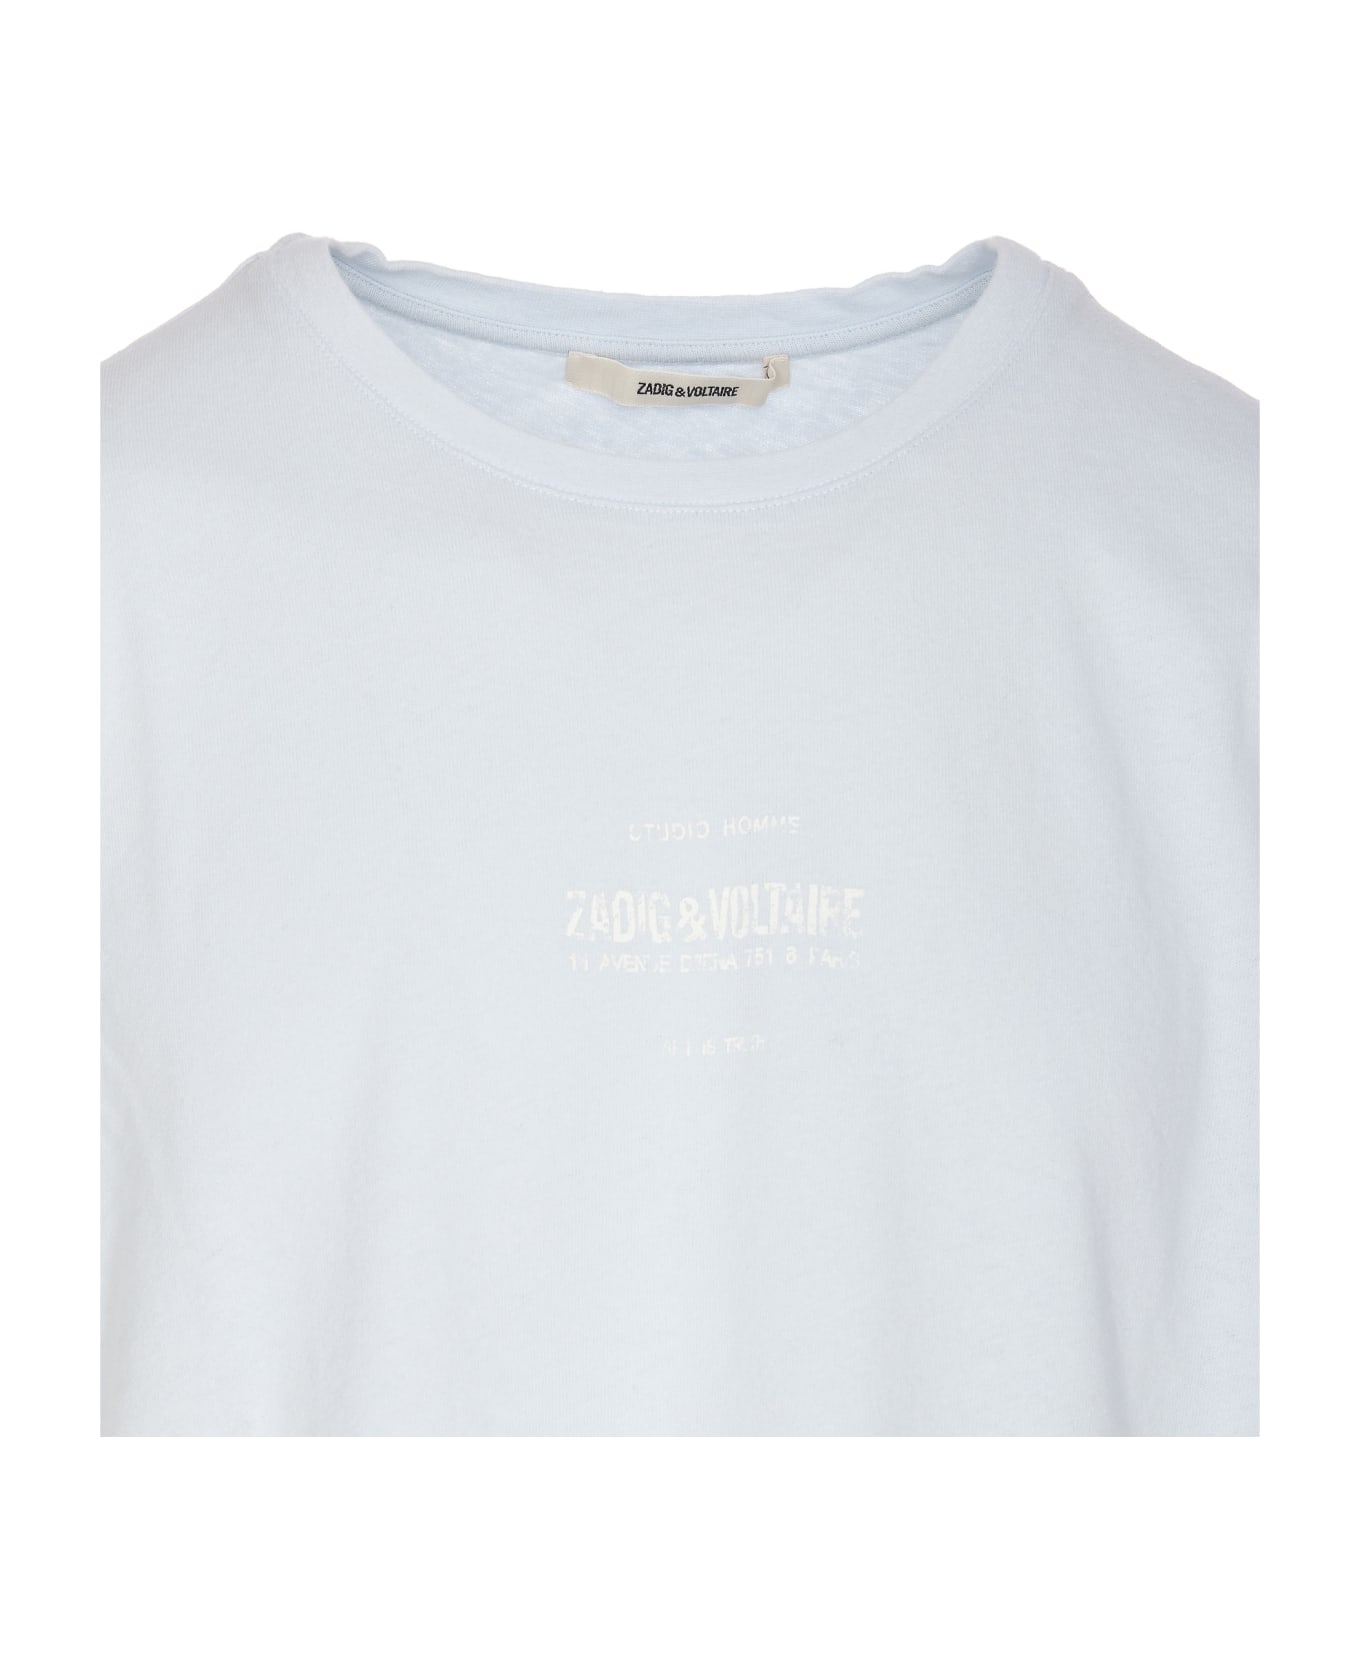 Zadig & Voltaire Jetty T-shirt - Blue